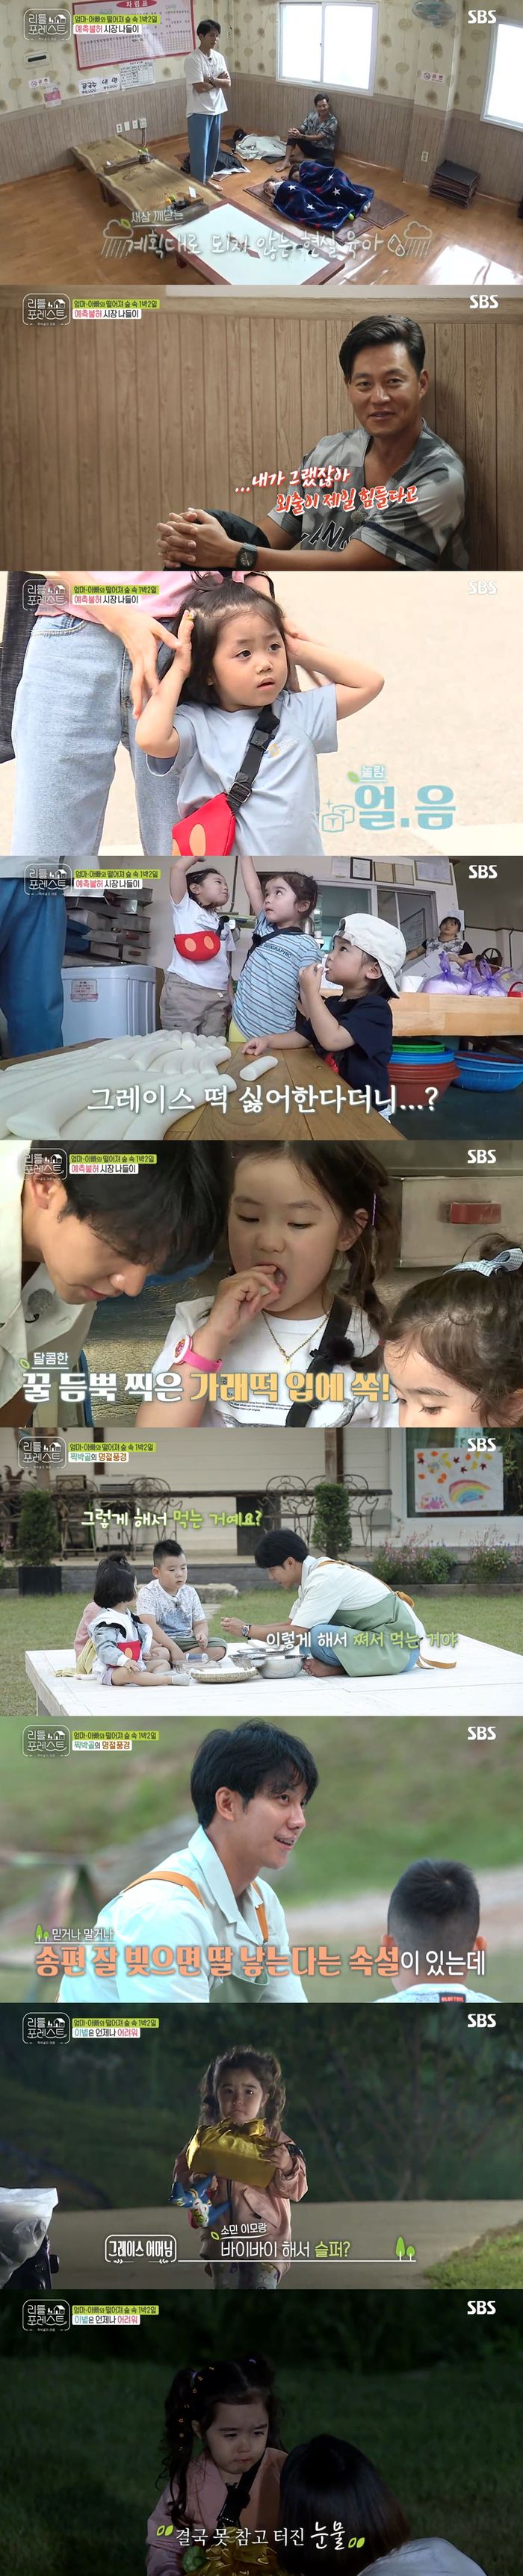 Graces fond tears towards Jung So-min took the Little Forest best minute.On the 17th, SBS Little Forest depicted Lee Seo-jin, Lee Seung-gi, Park Na-rae and Jung So-min, who were in the market for Chuseok with Little.The carers and the Littles headed to the market to buy the ingredients for the holiday food, and the Littles were excited about the first market outing with The Uncle and Auntie.But the excitement was also a moment, and Lee Seung-gi and Lee Seo-jin lamented that if you have children, there is nothing that you think is going to happen.Lee Seung-gi and Lee Seo-jin sighed when they left Little in the restaurant.In the meantime, Park Na-rae and Jung So-min had a good time watching the process of popping with Lee Han and Ye Jun.Waking up, Eugene, Grace and Gaon headed for the market mill with Lee Seung-gi, who were happy to eat freshly-made rice cakes in honey.Since then, I have bought hot dogs in the market and have enjoyed a pleasant outing with lunch together.After returning home after finishing the shopping, they started making Chuseok food such as Songpyeon and the war.Following the demonstration of Lee Seung-gi The Uncle, The Master of Songpyeon, Little also participated in the songpyeon debt.The family-like appearance of preparing Chuseok food together made me smile.In particular, Lee Seung-gi said, Is not there a myth that you will have a daughter if you make a songpyeon well?Little Lee enjoyed a generous dinner with the finished Songpyeon and Chuseok food.Later, the breakup time came for Littles to take their familys hands and return. Grace stopped and started crying.To her mother, who asked why, Grace cried, I miss Aunt Somin. The scene soared to 6.1% per minute of ratings, taking the best minute.Little Forest is broadcast every Monday and Tuesday at 10 pm.